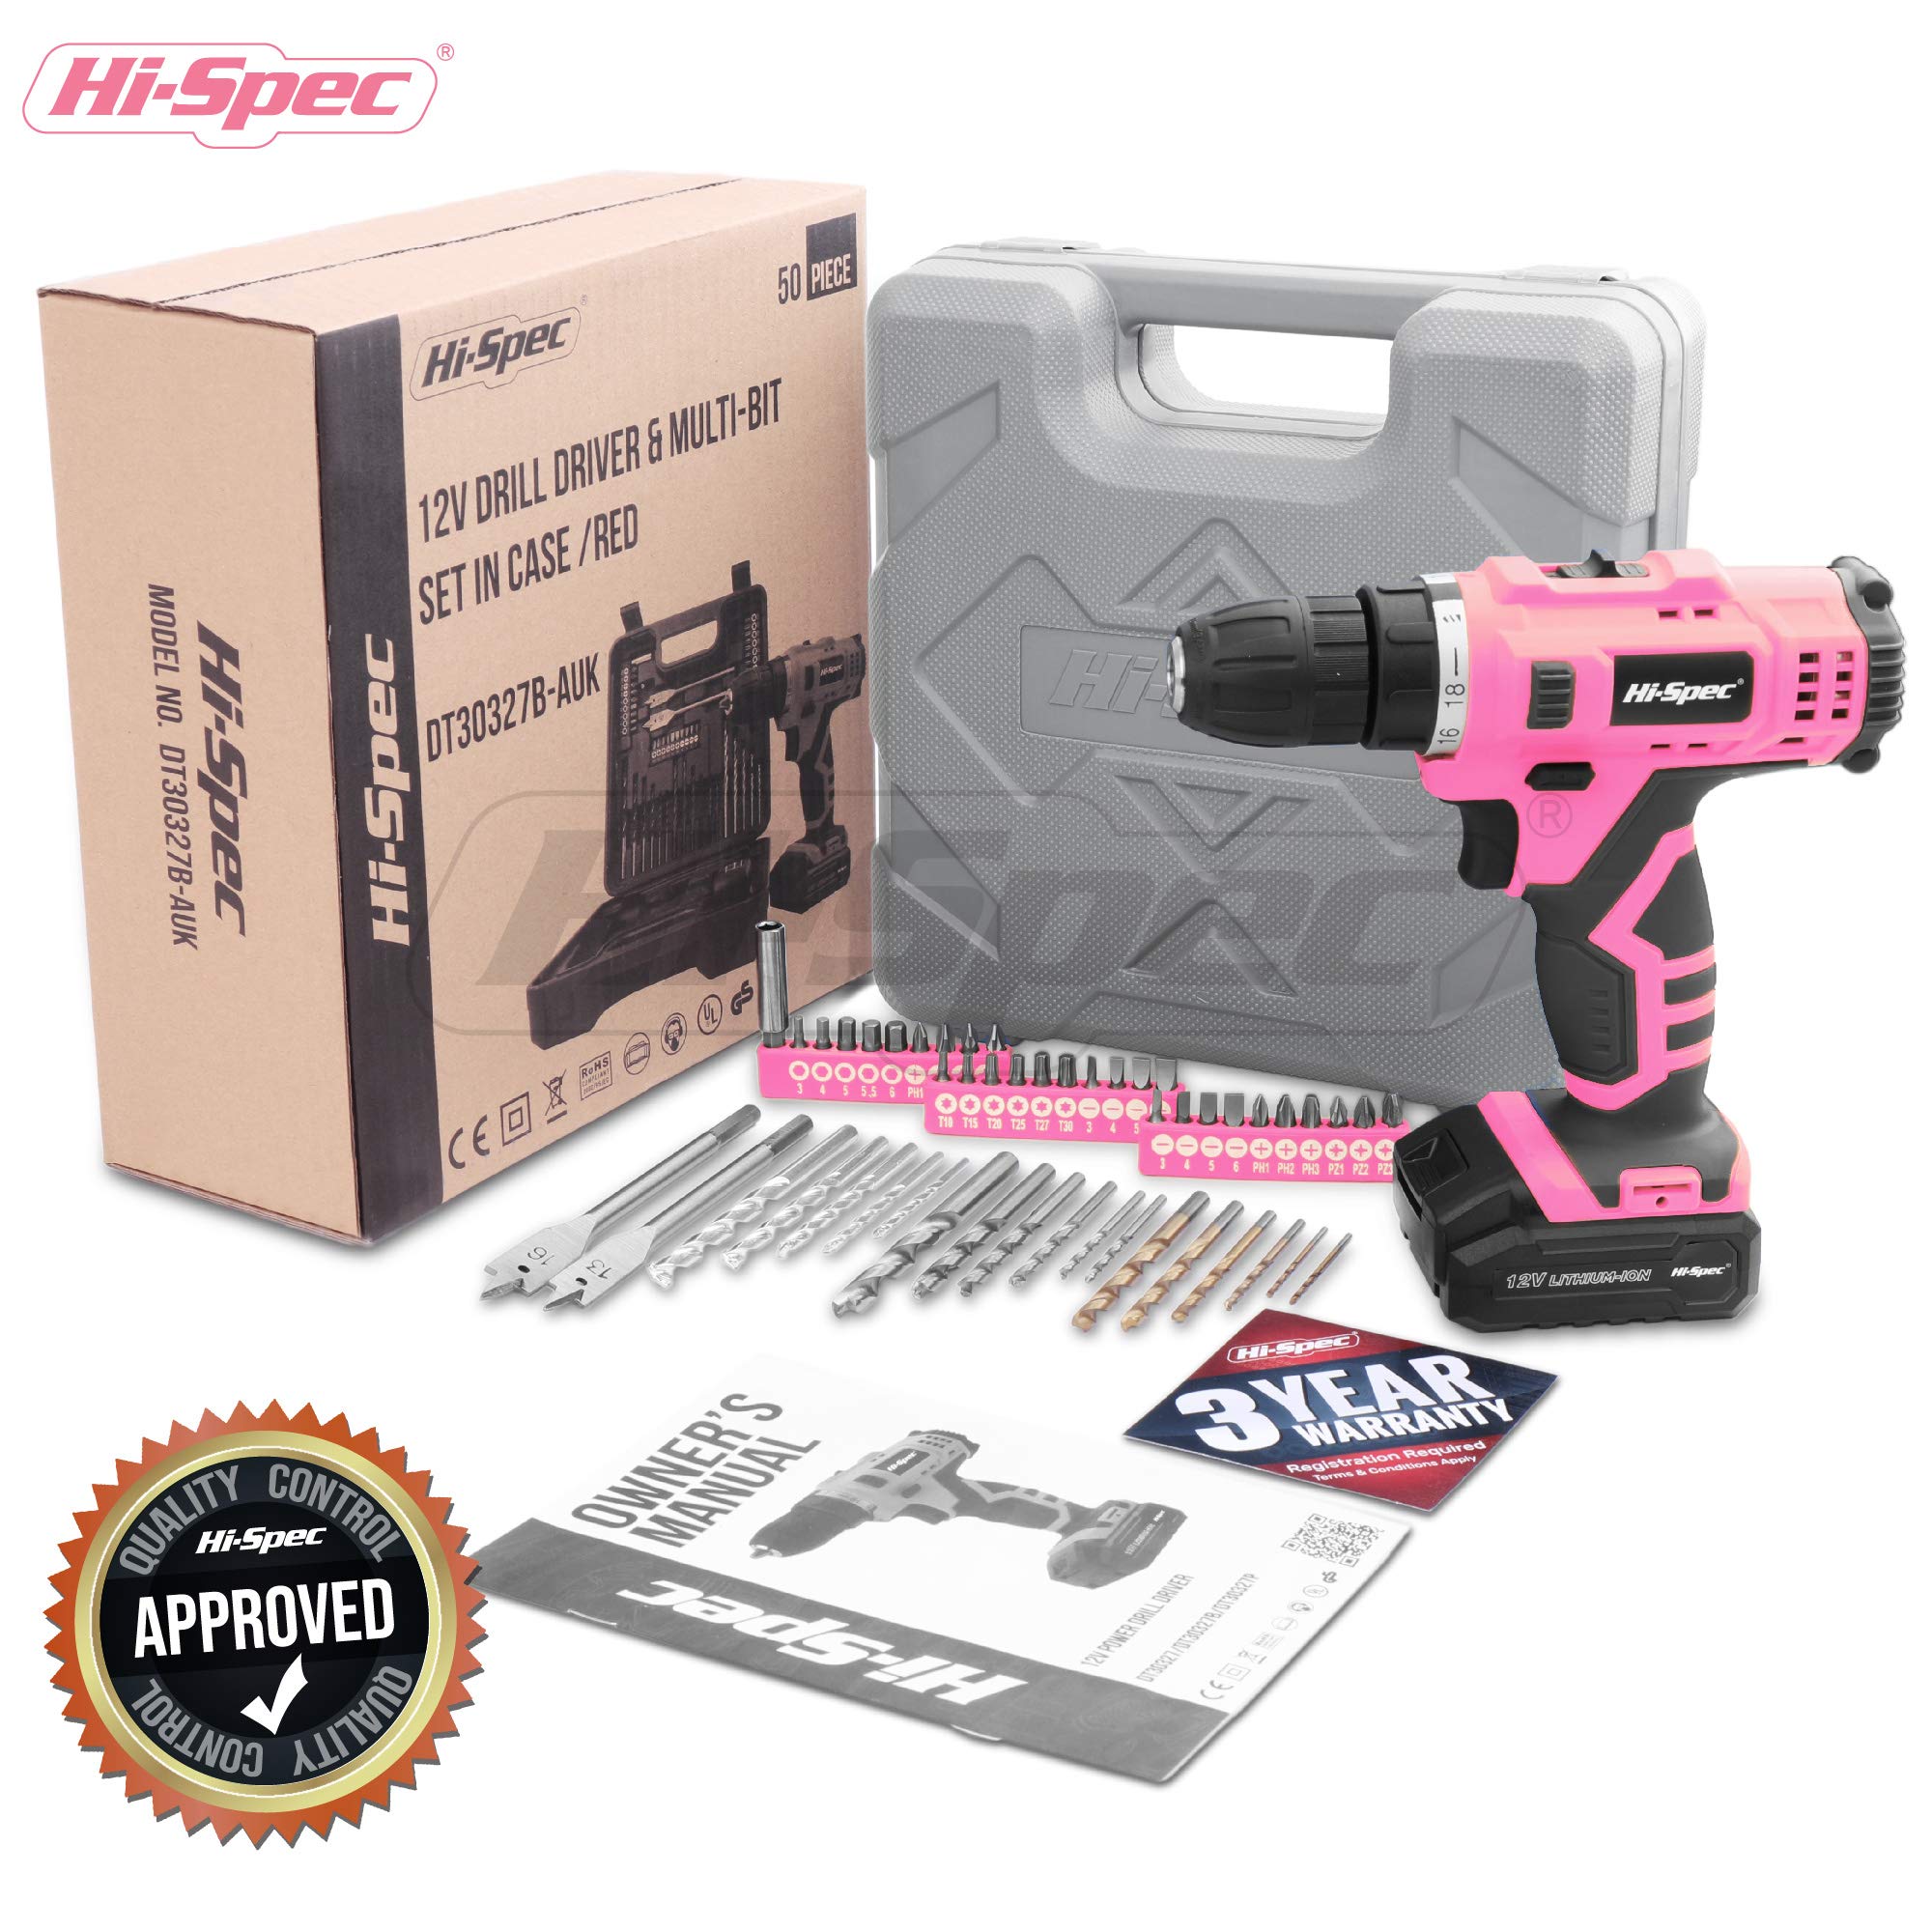 Hi-Spec 50pc 12V Cordless Drill Driver Set - Portable Tool Box and Bit Set for DIY Projects, Home Repair, and Professional Use, for Women and Beginners